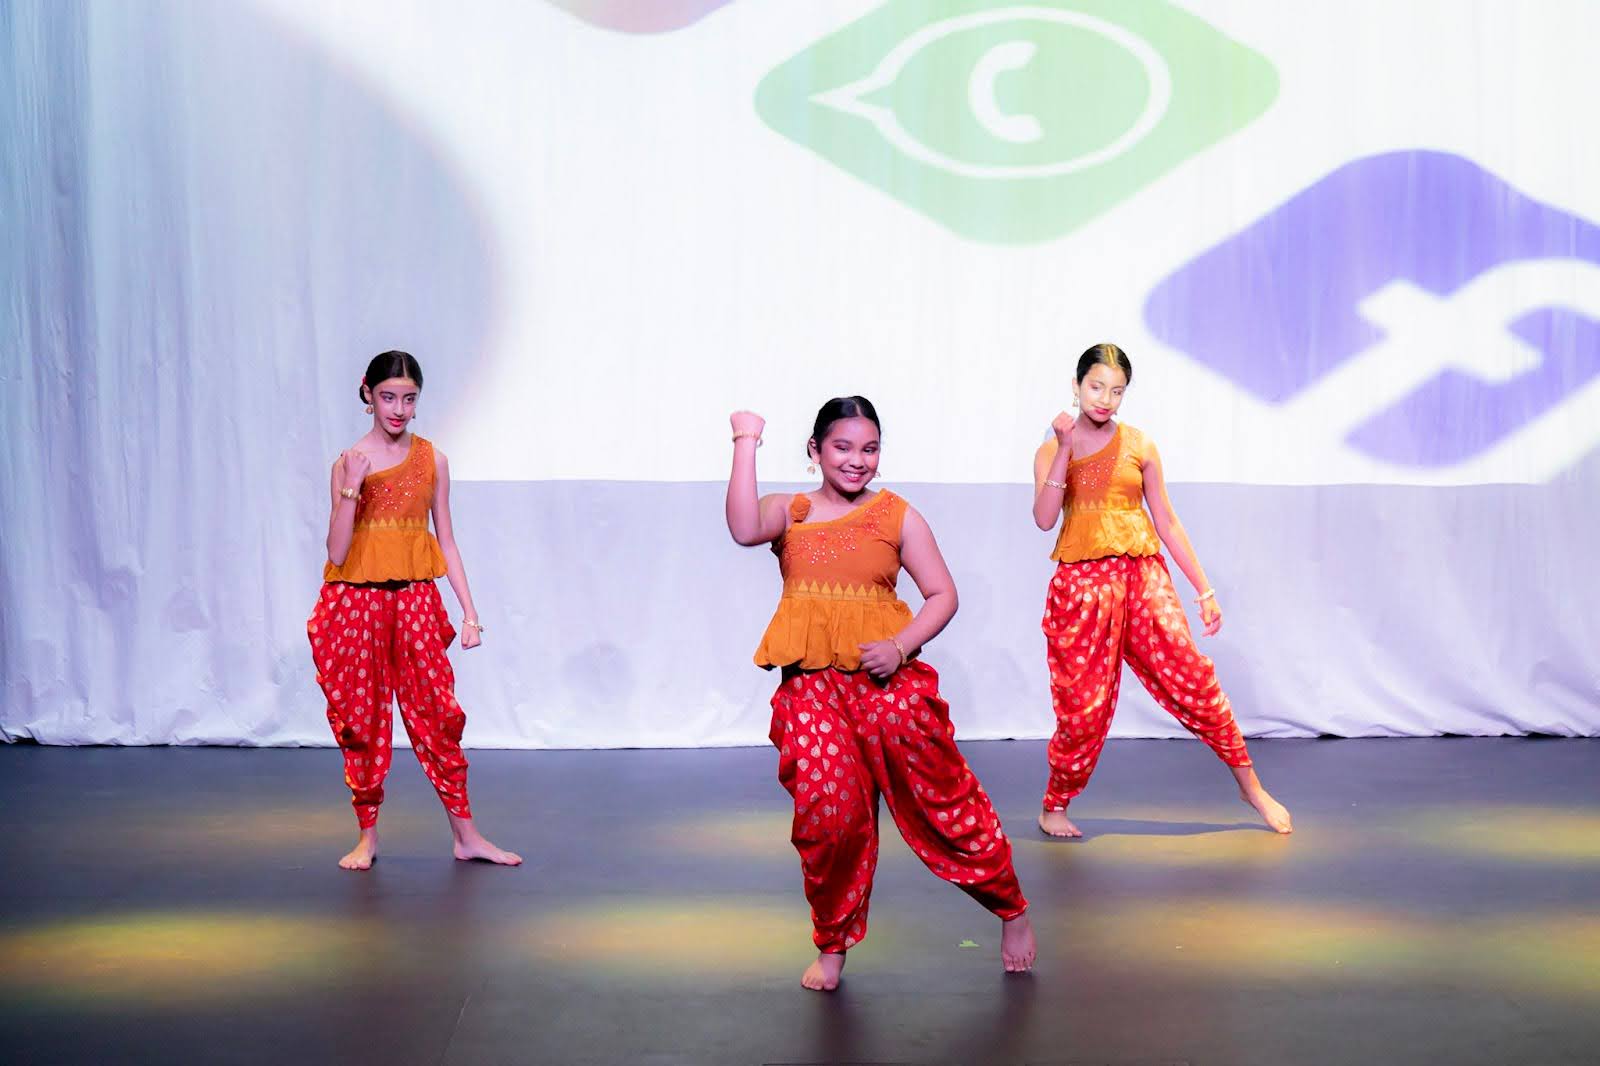 Stephanie Persaud takes center stage at the Dance Expression Summer Showcase 2022, confidently performing with fellow dancers in vibrant red and orange traditional attire.